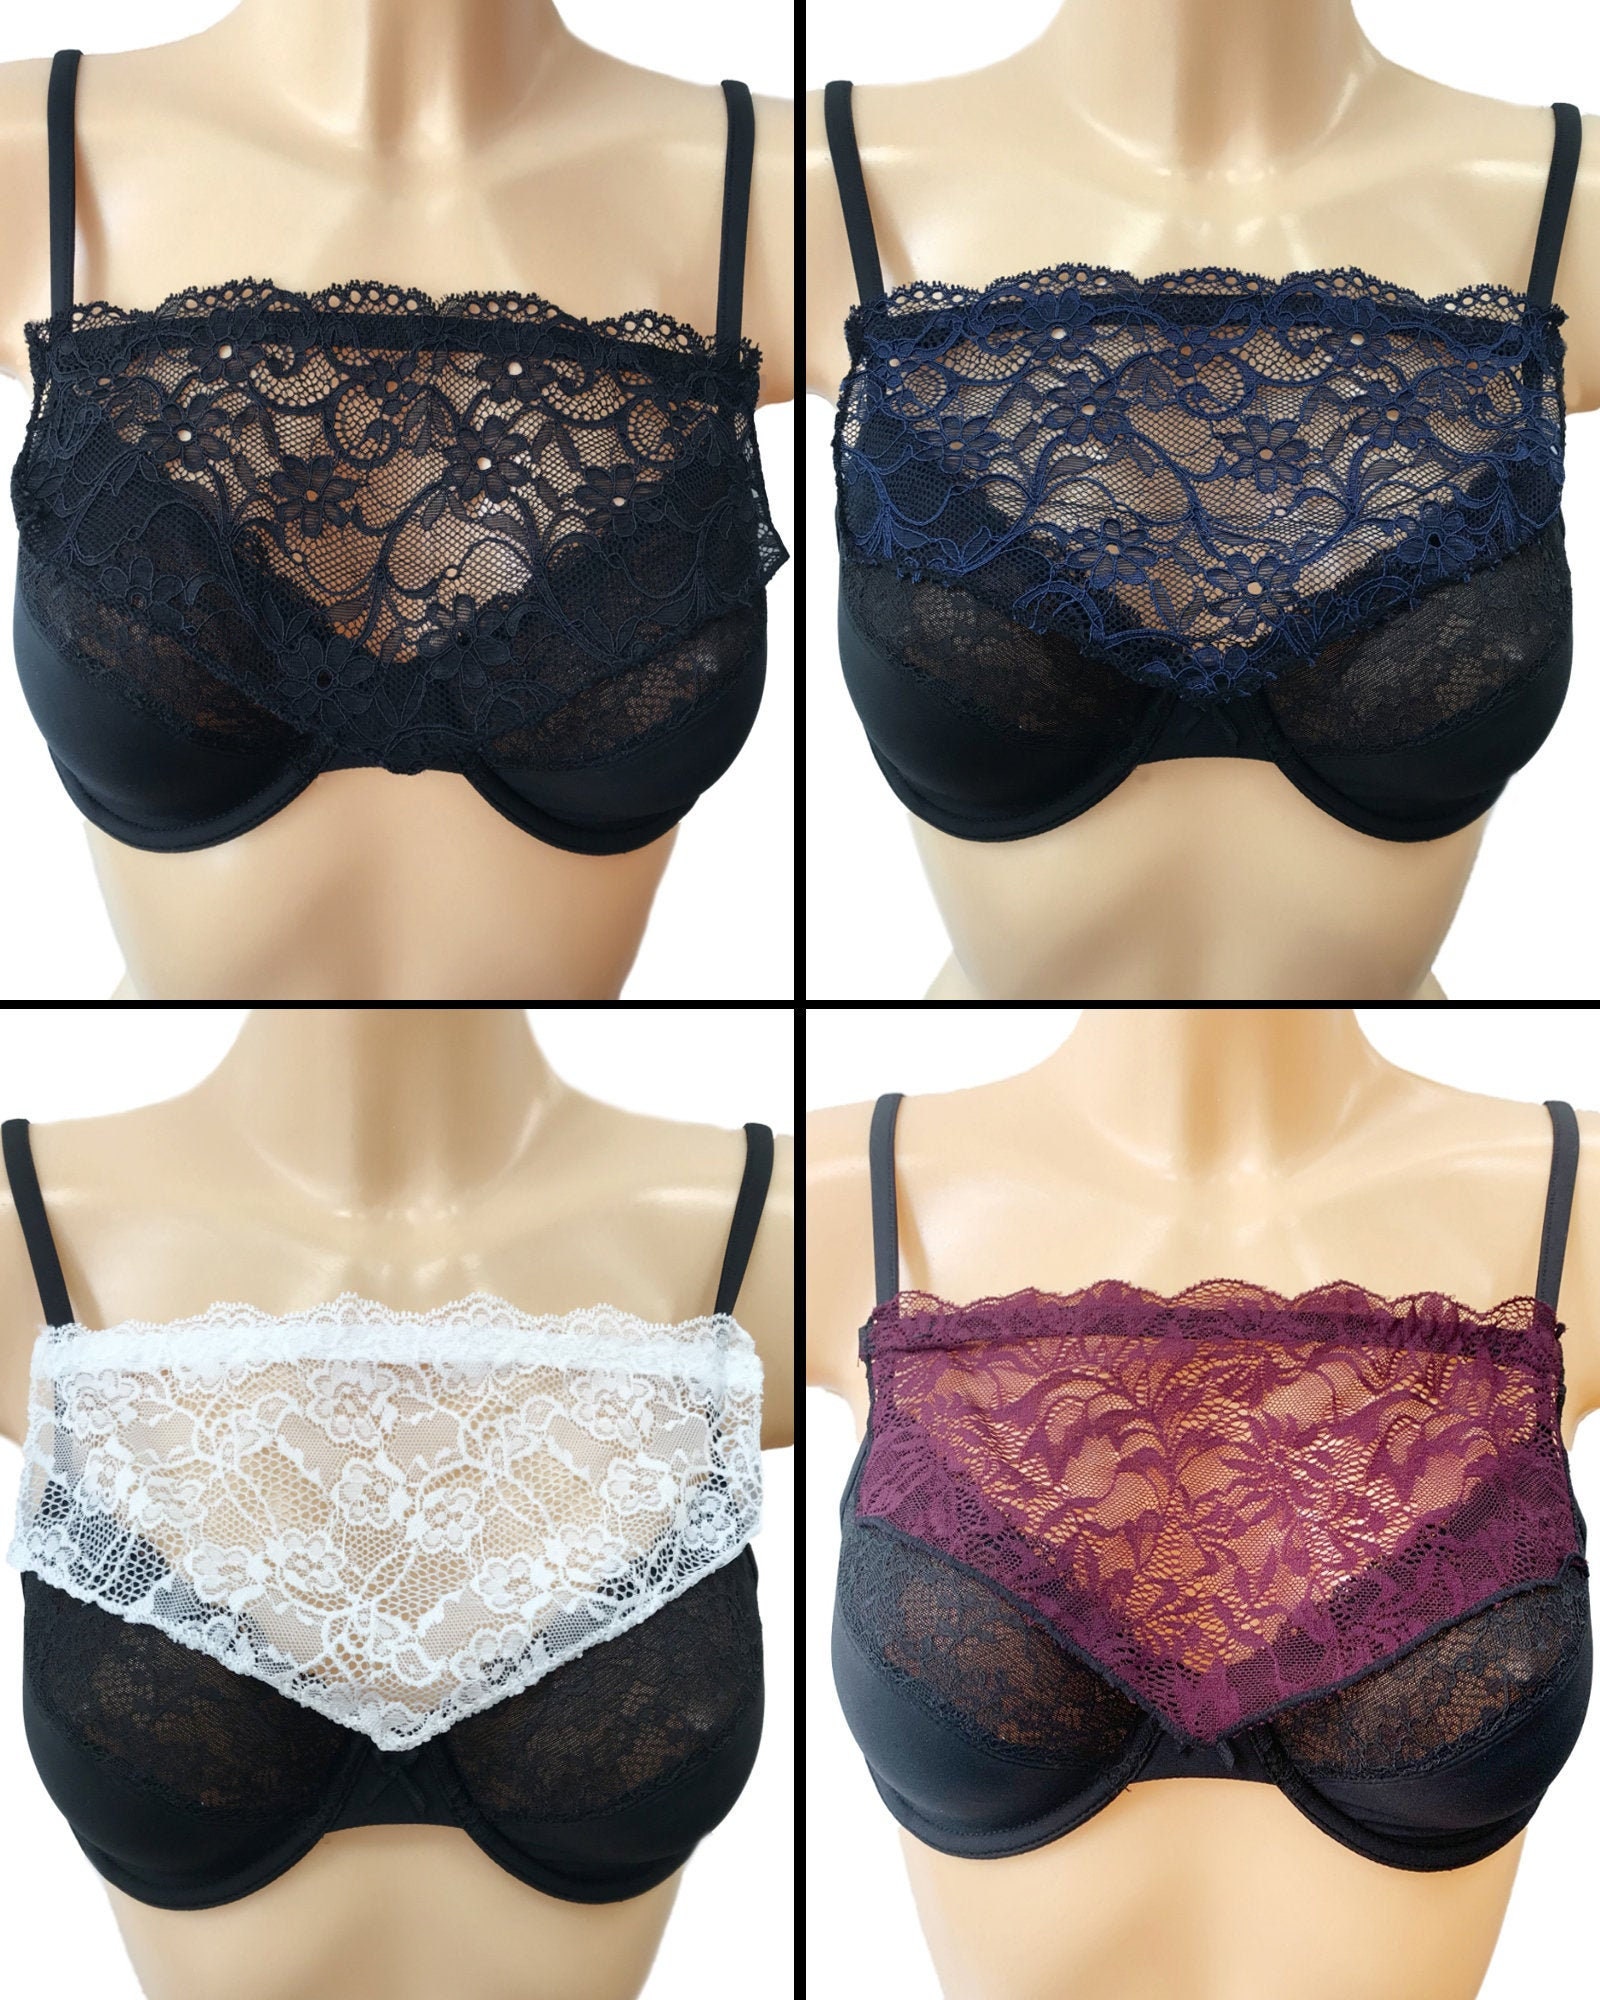 Modesty Panel Lace Bra Insert Instant Camisole Cleavage Cover Black Navy  White Purple -  Sweden